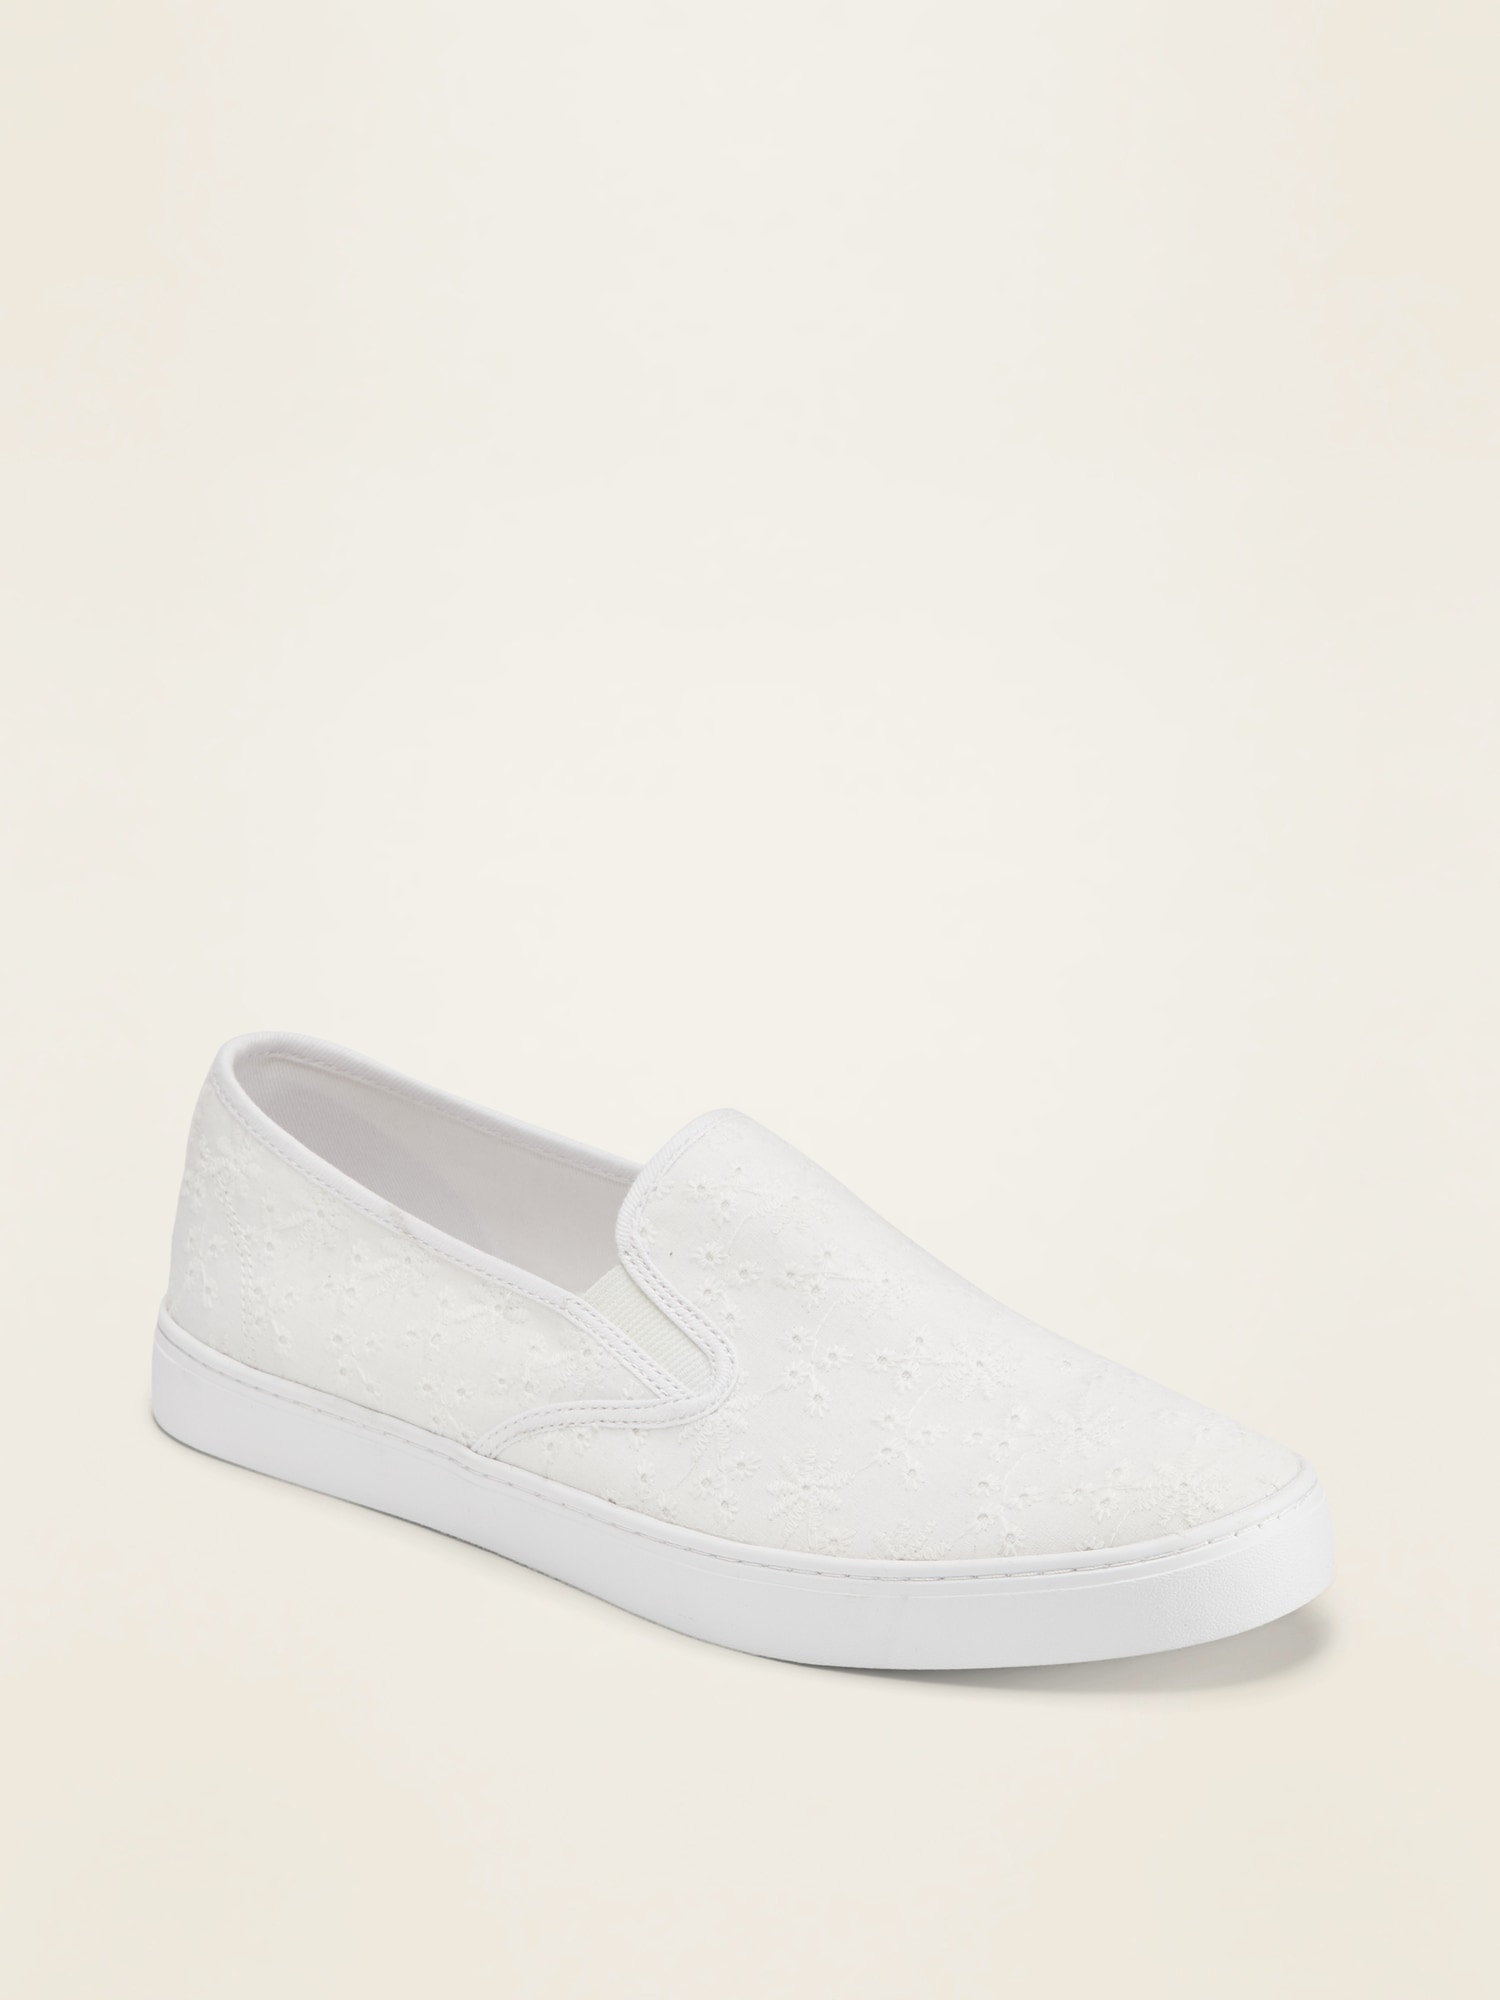 navy slip on womens shoes